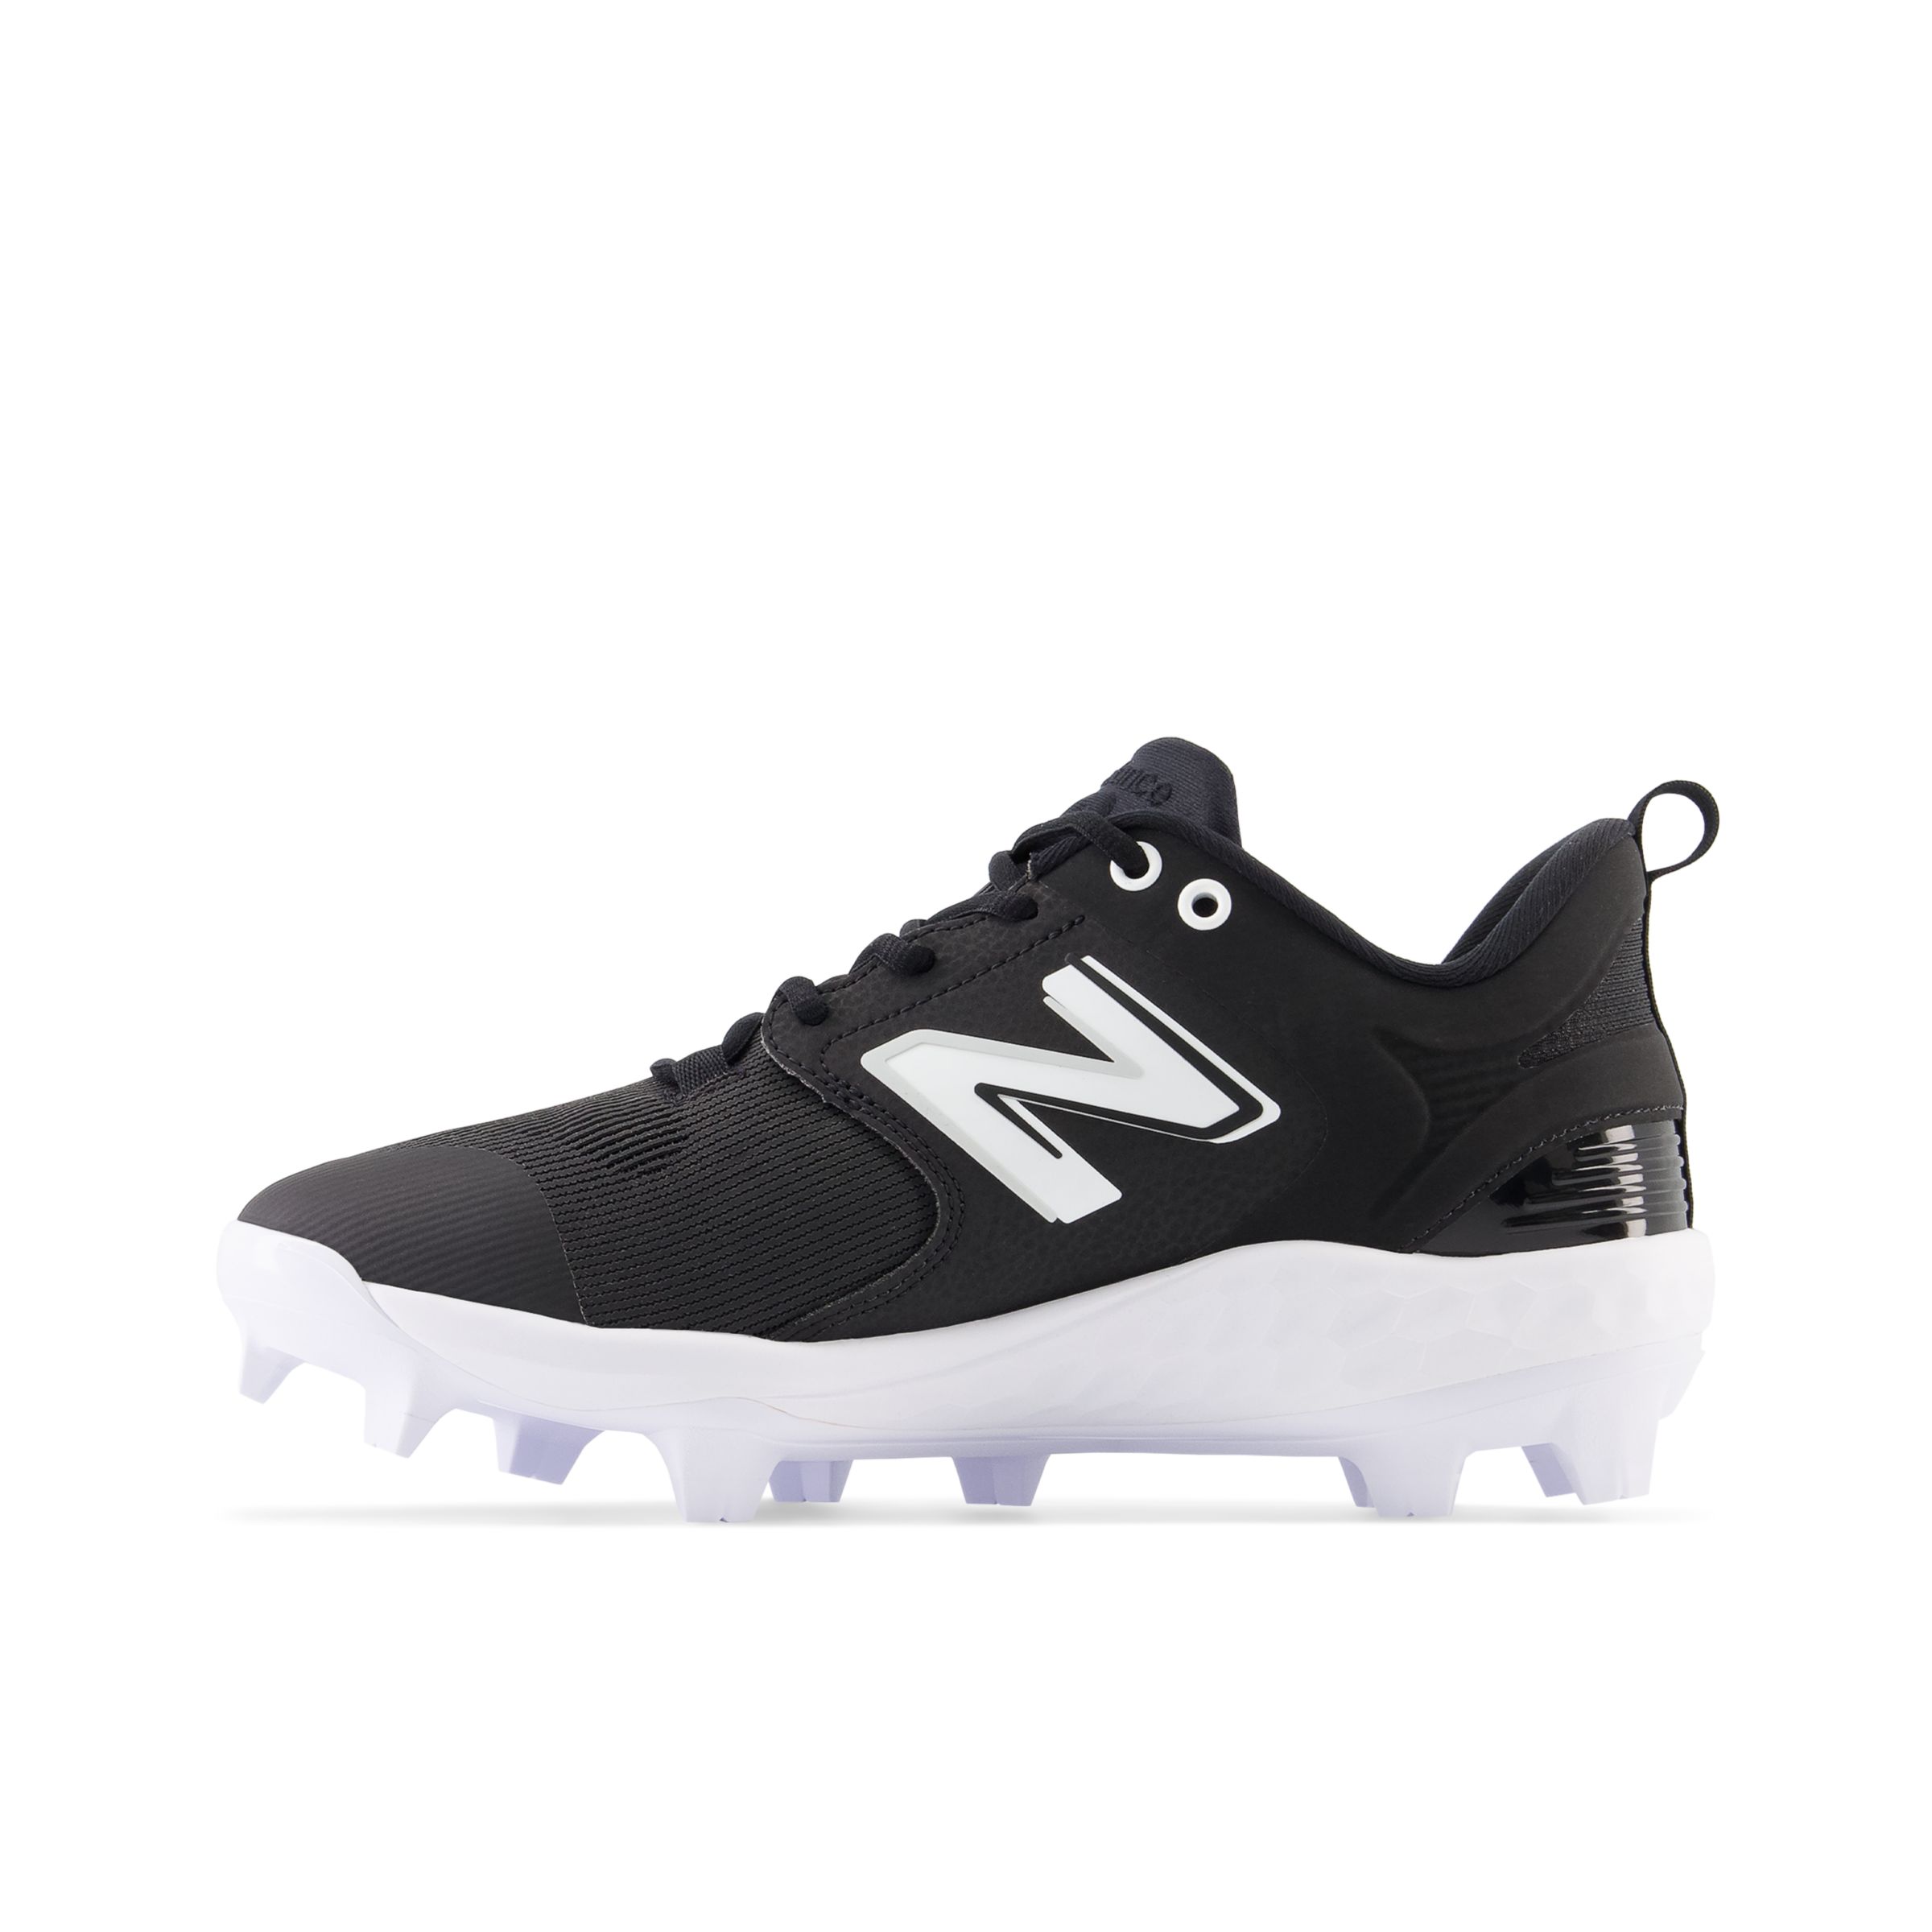 New Balance Fuelcell COMPv3 Low Men's Baseball Cleat